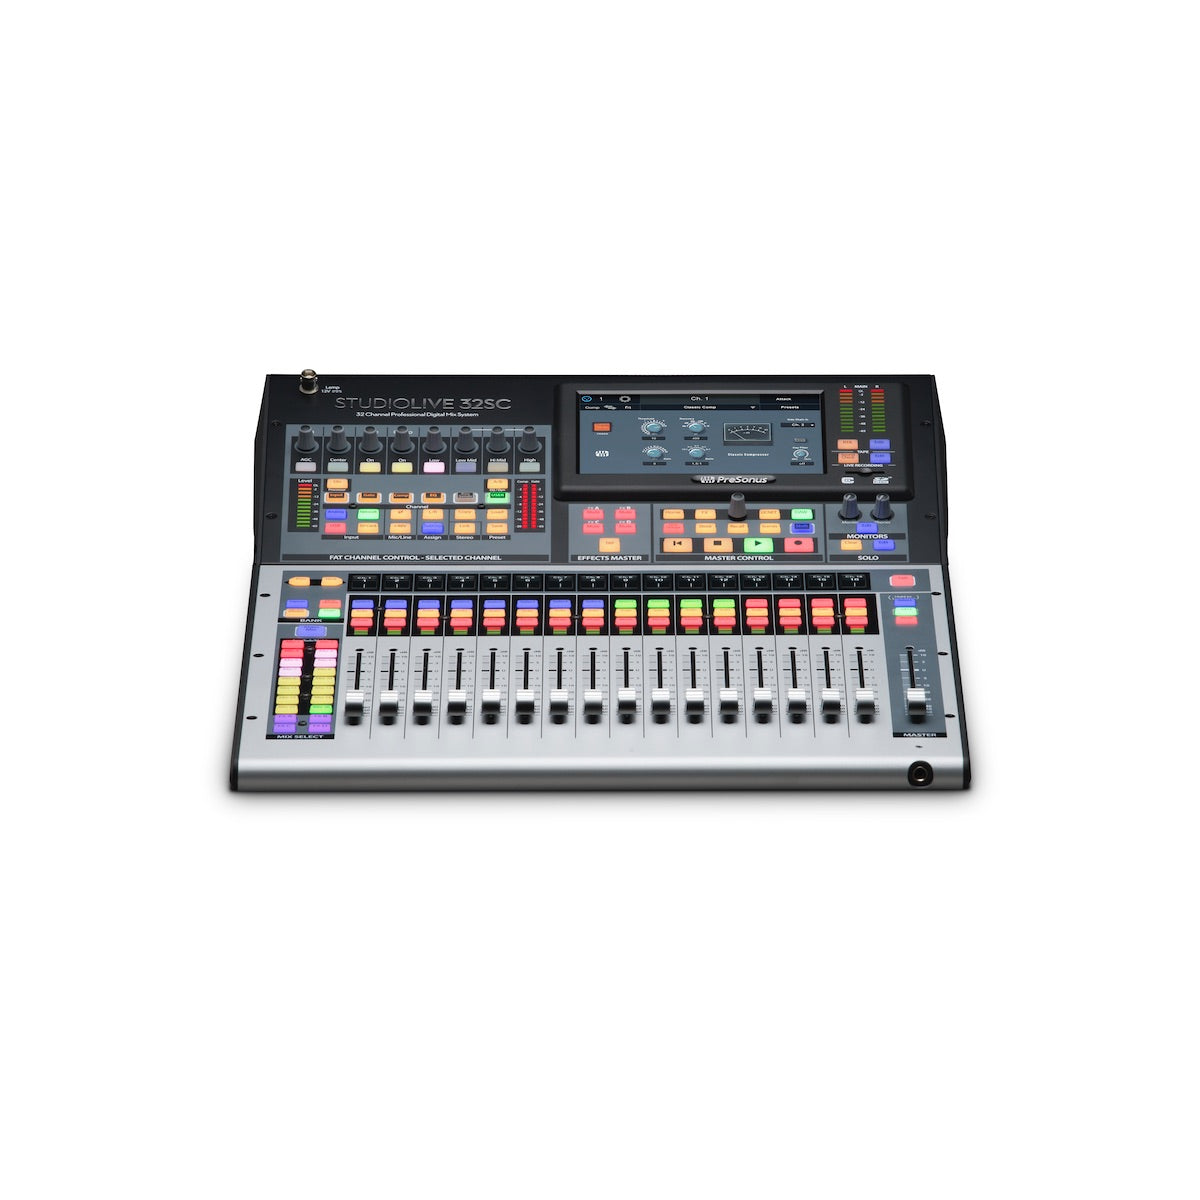 PreSonus StudioLive 32SC - Subcompact 32-channel Digital Mixer with Effects, front